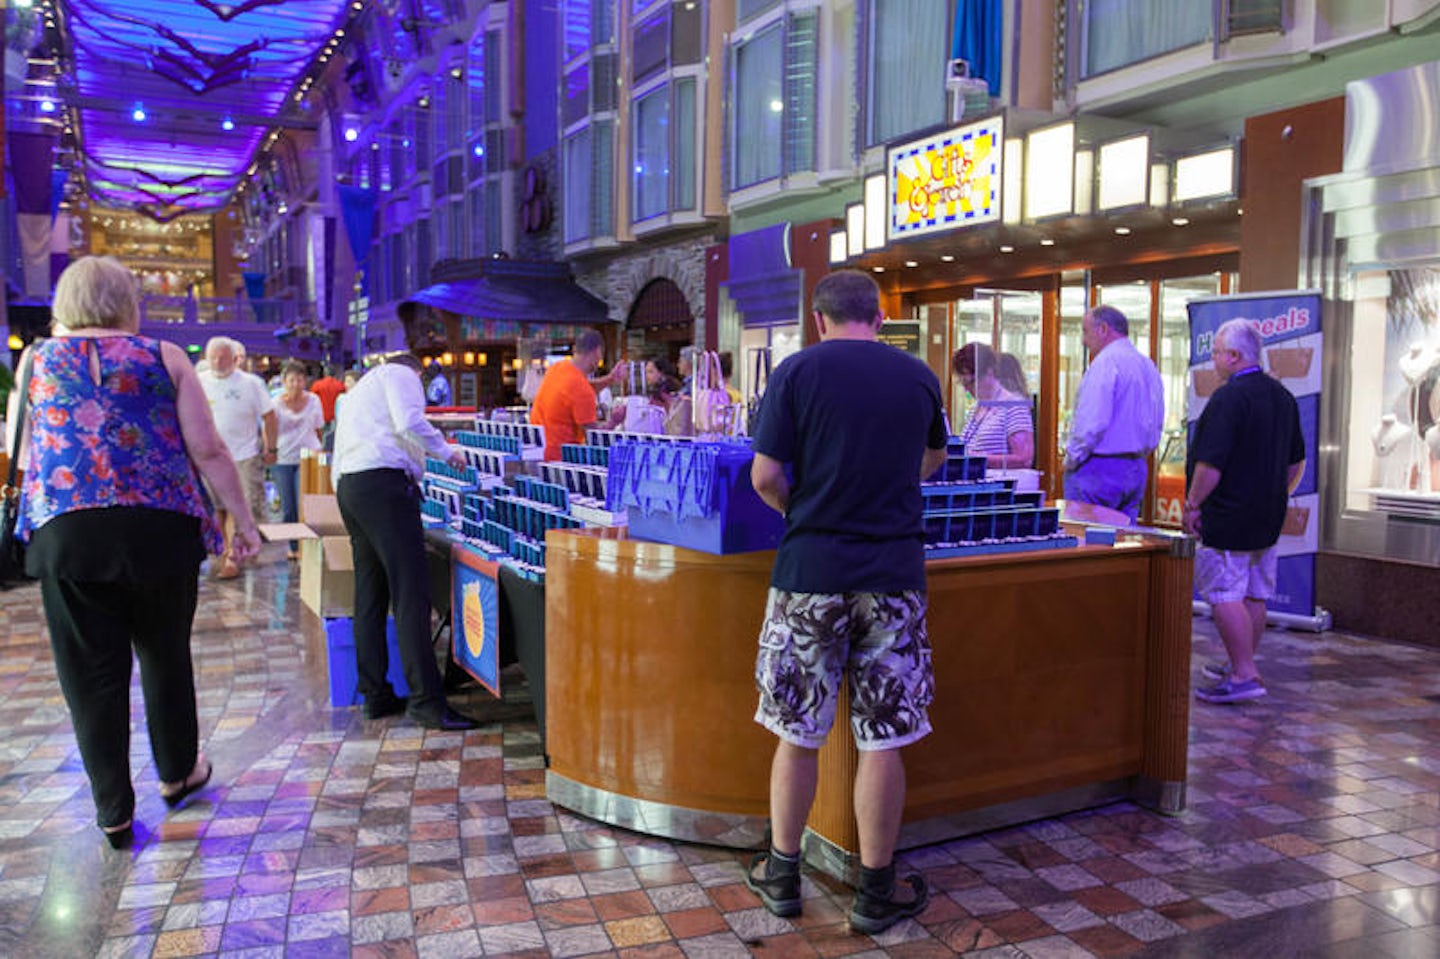 Promenade Shop Sales on Independence of the Seas